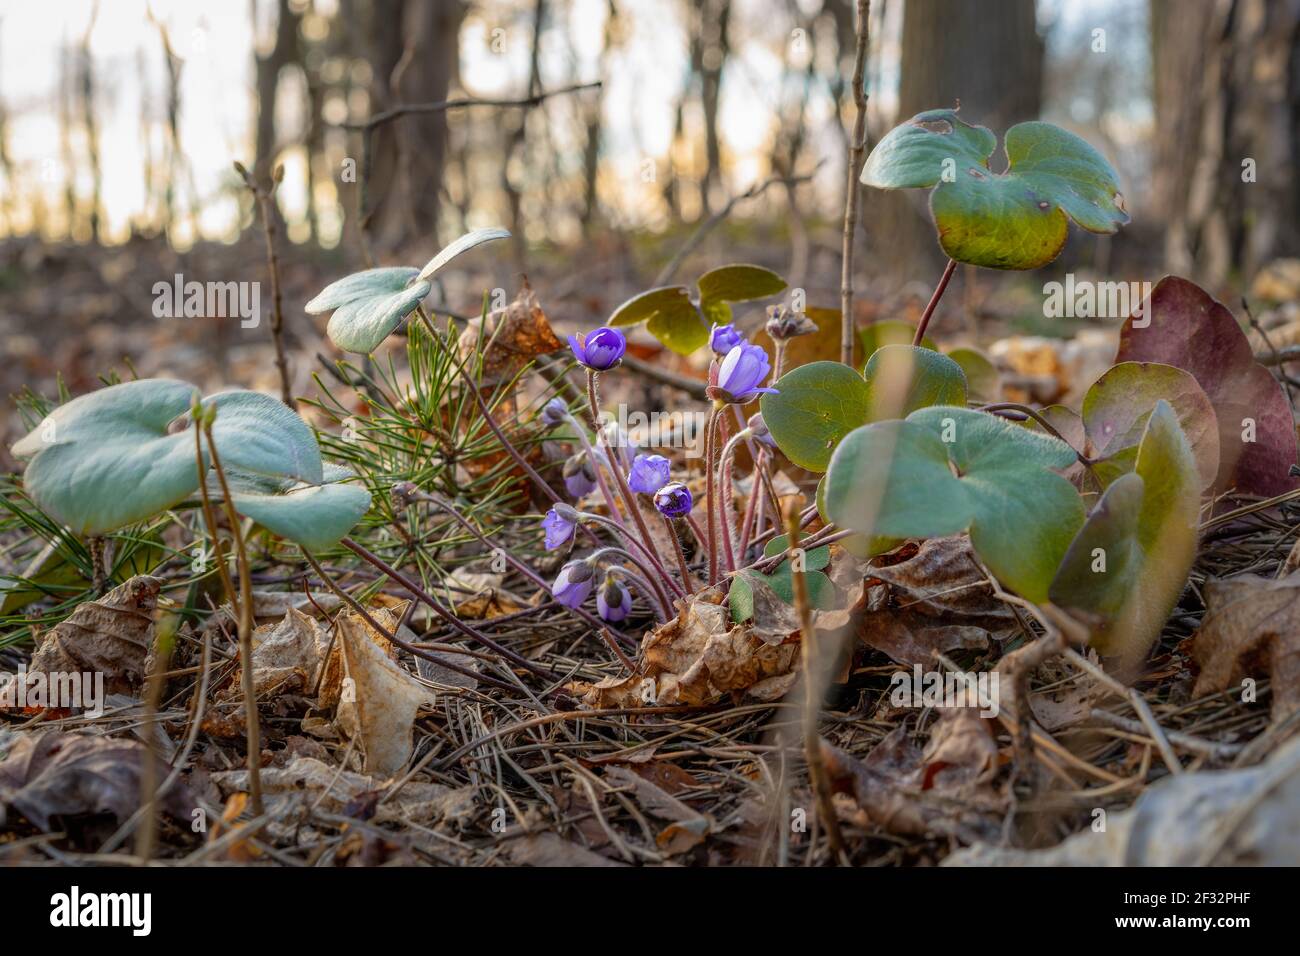 The first blooming violet violets, hepatica nobilis, among last year's leaves in the forest, in a natural setting, in the early spring at sunset Stock Photo